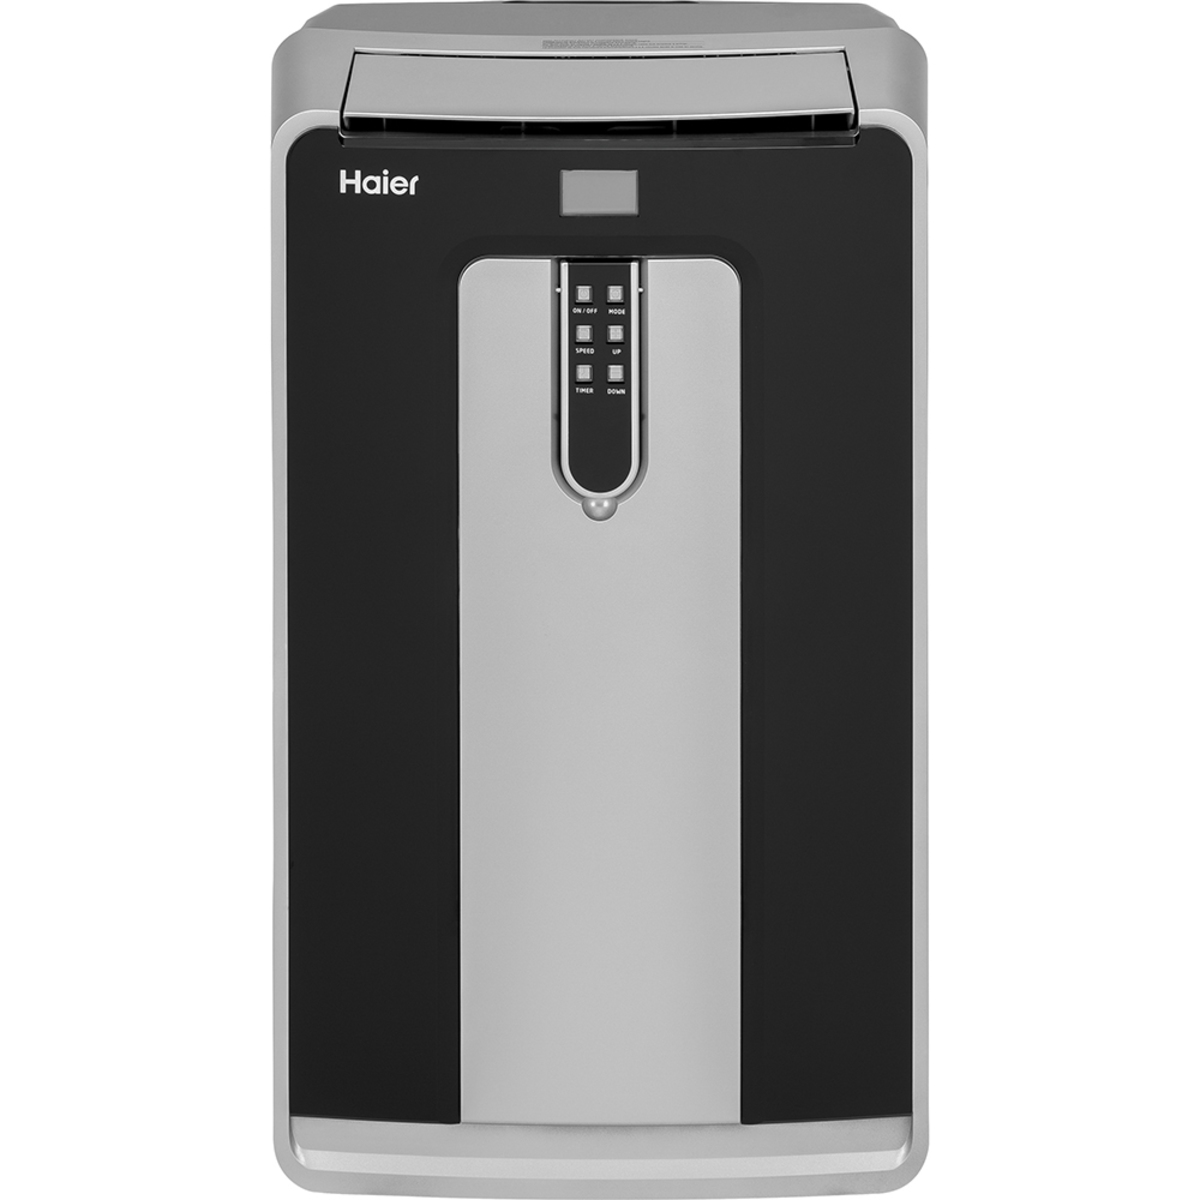 Haier 14 000 Btu Portable Air Conditioner Black On Stainless Hpnd14xct Air Conditioners Home Confort Canada Service Site